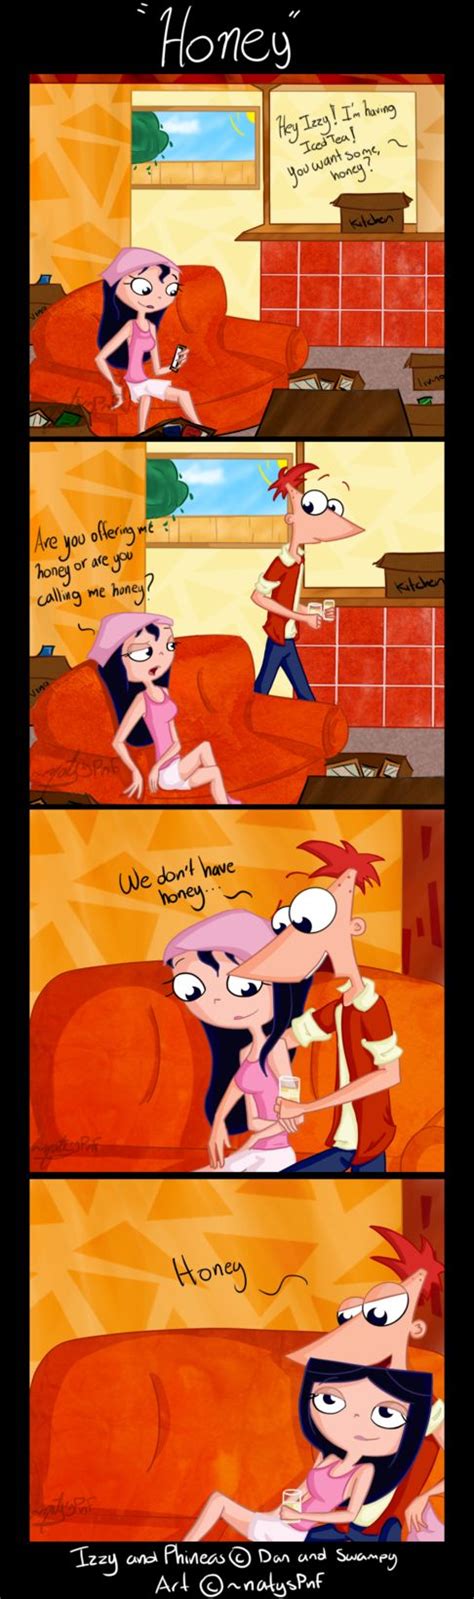 10. 11. Next. Read and download 217 free comic porn and hentai manga with the parody phineas and ferb.